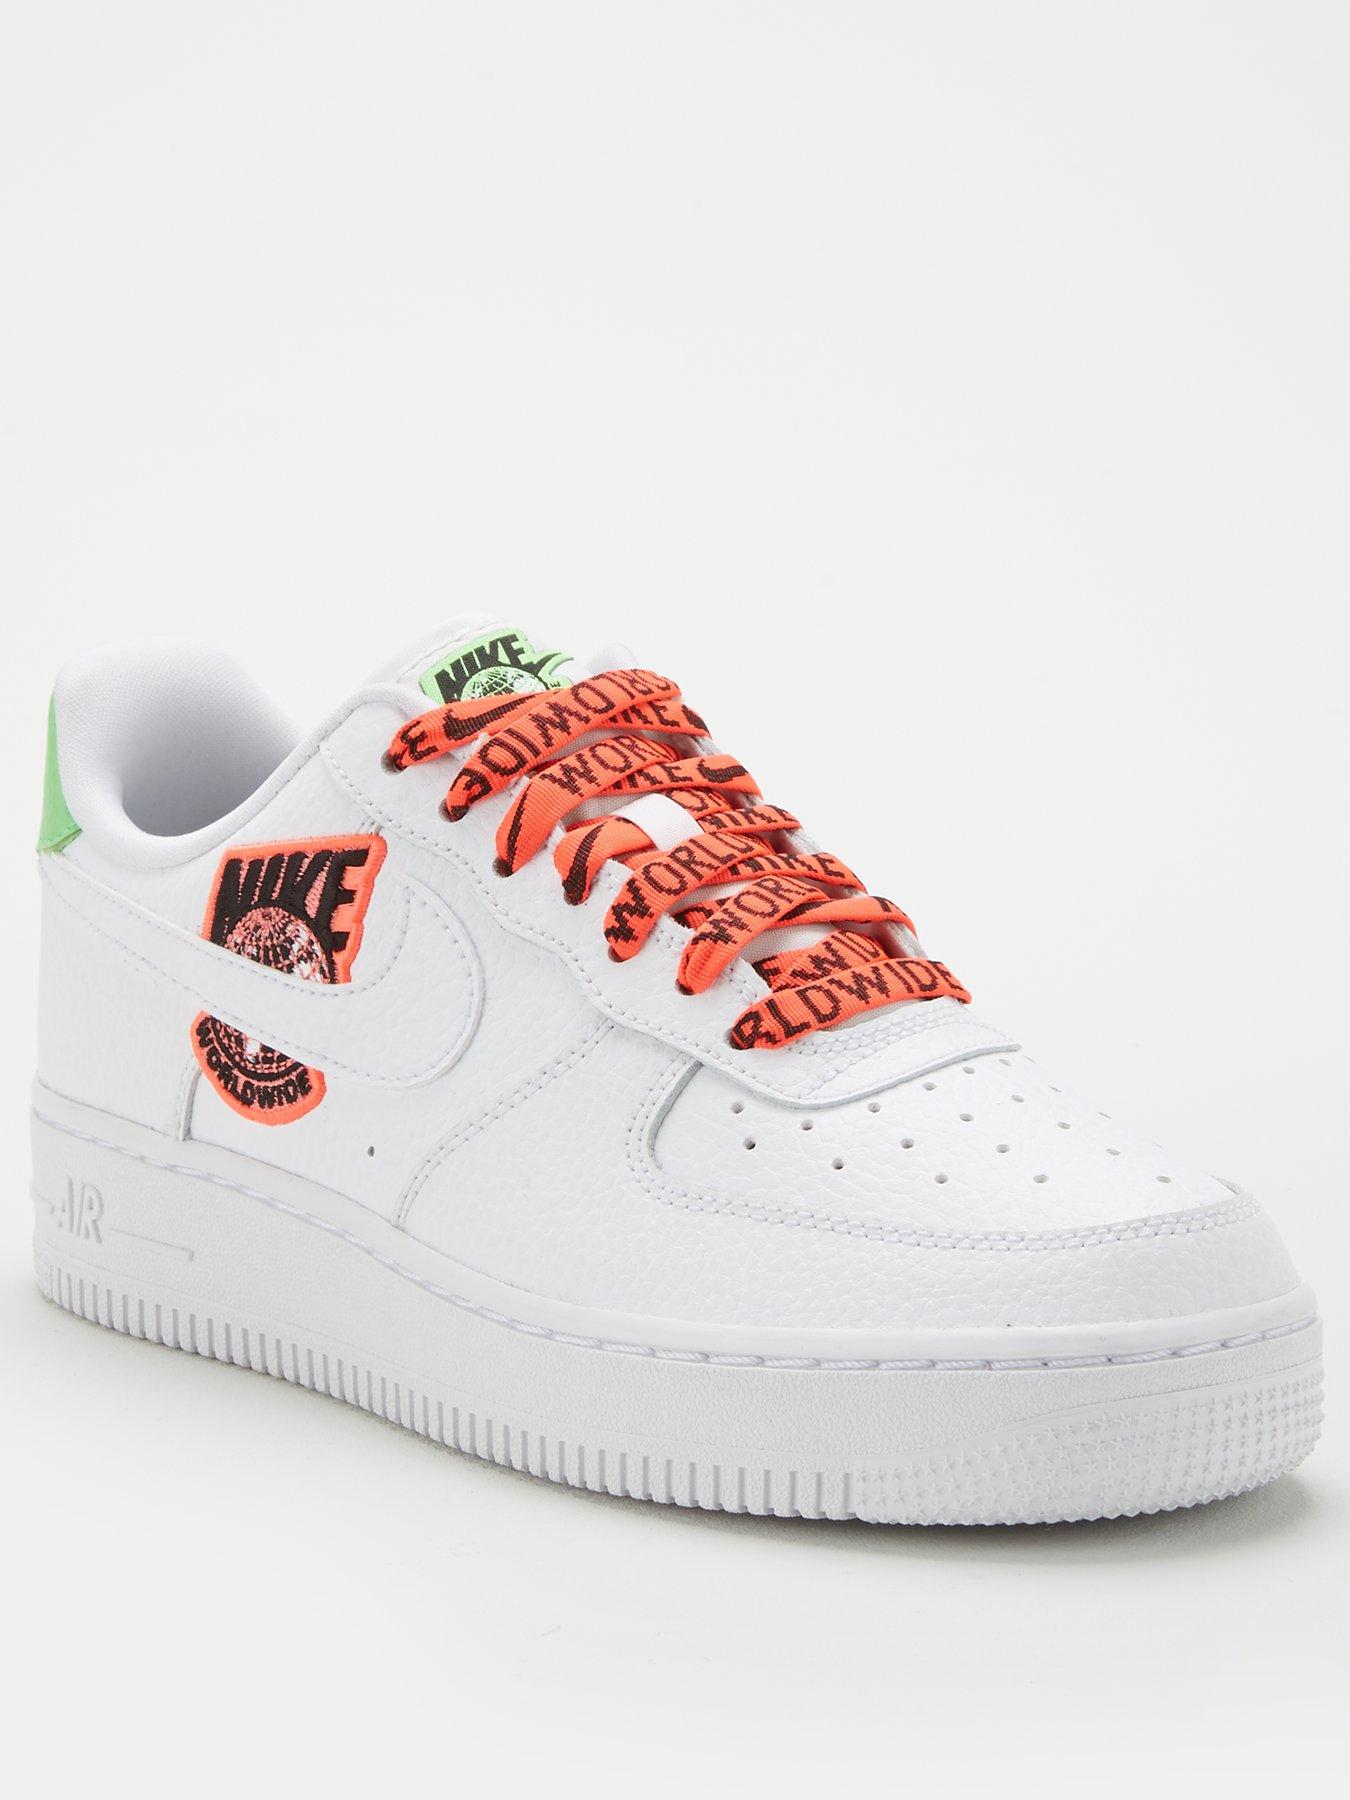 orange and green air forces